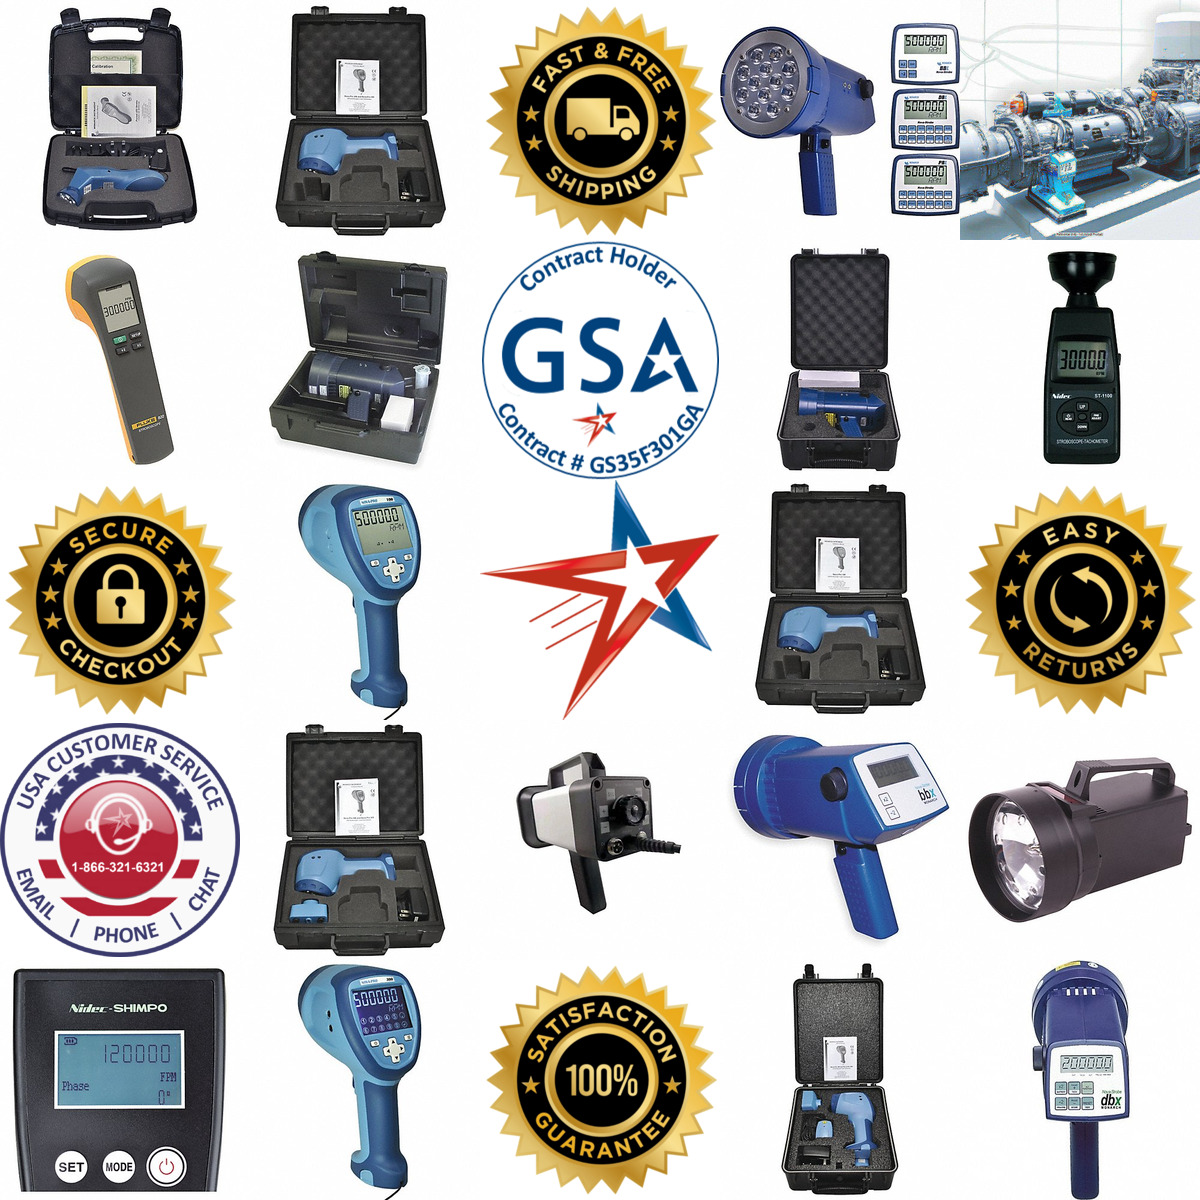 A selection of Stroboscopes products on GoVets